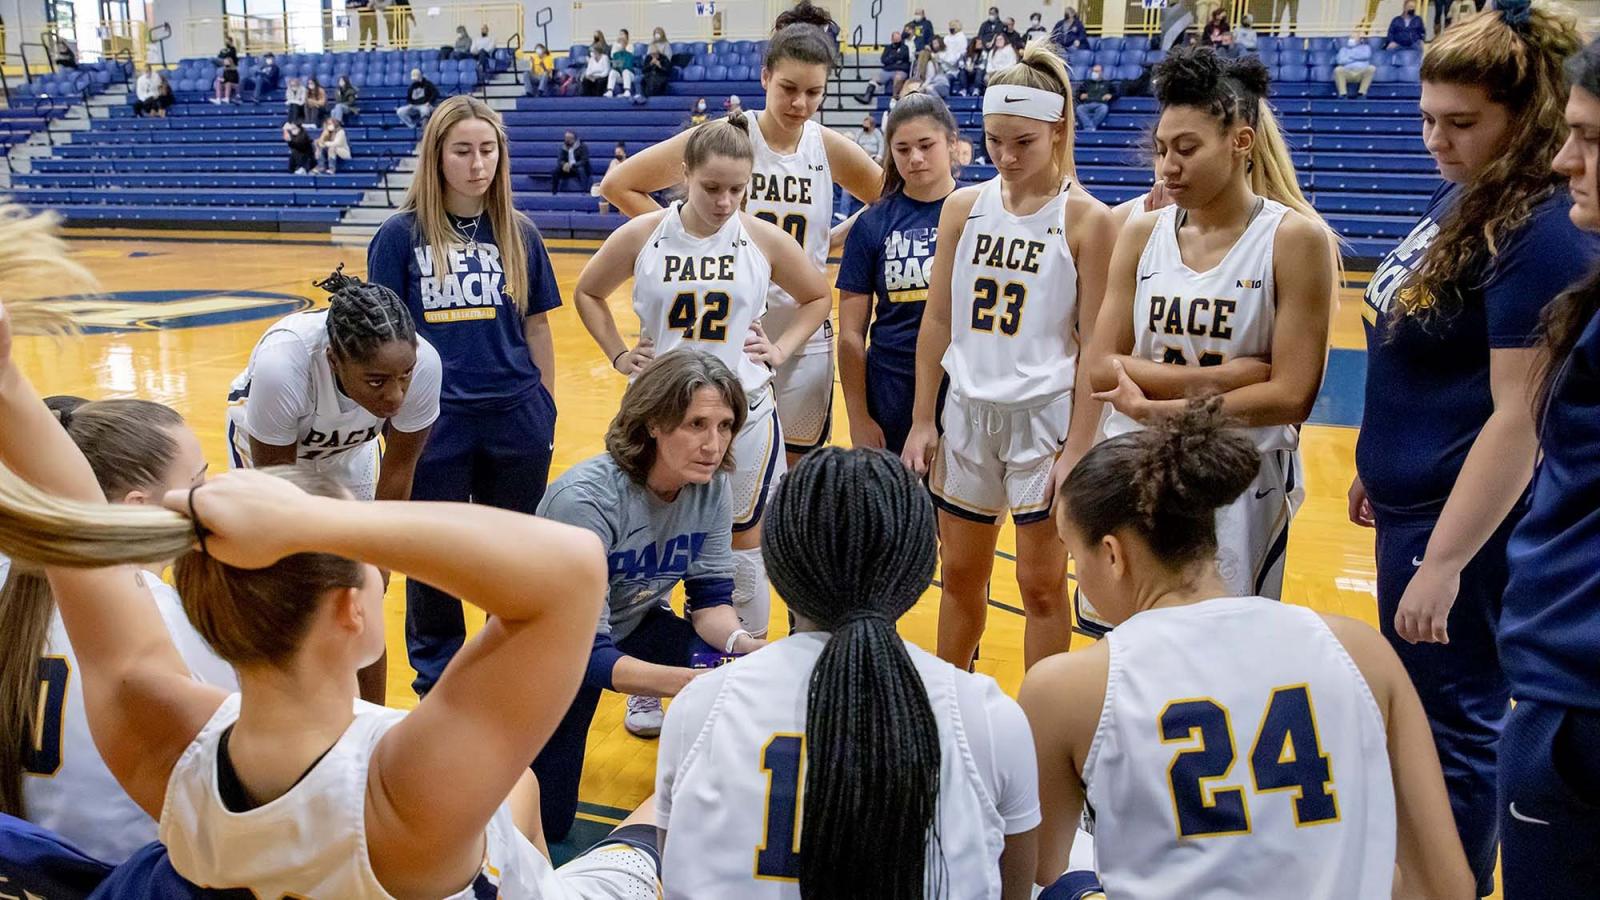 Pace coach Carrie Seymor talking to women's basketball team courtside